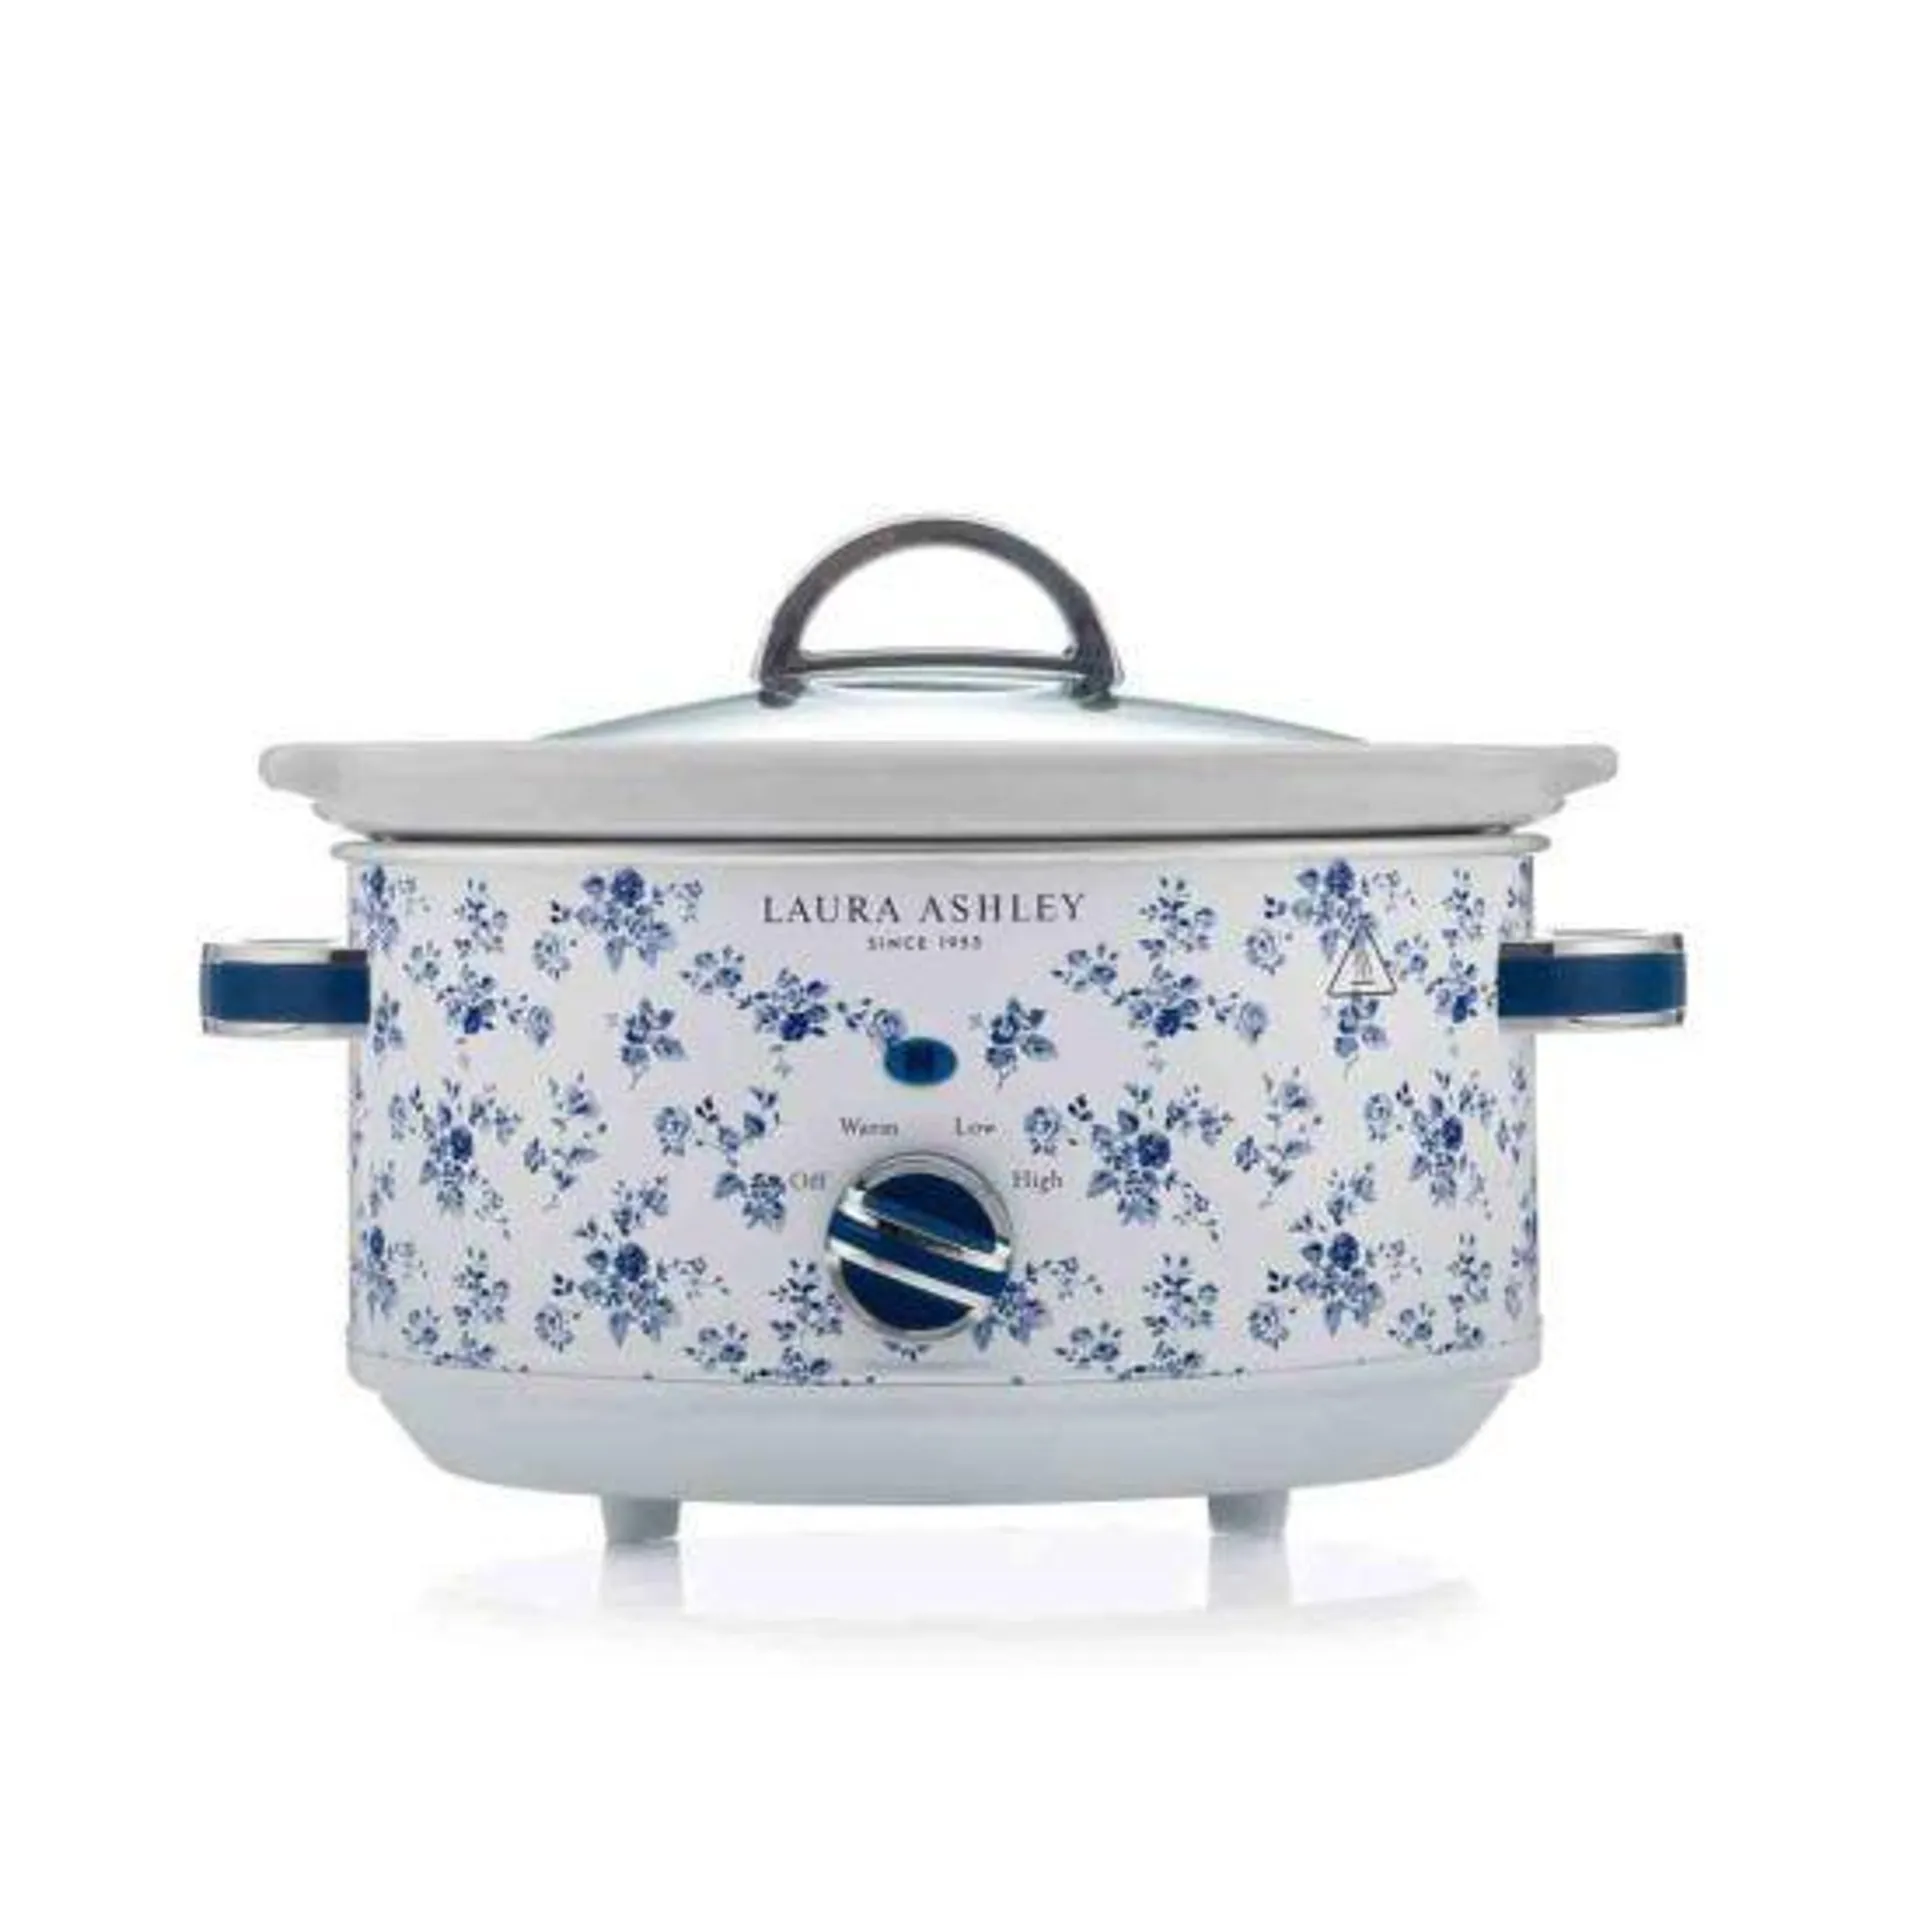 VQ - Laura Ashley 3.5L Slow Cooker – China Rose